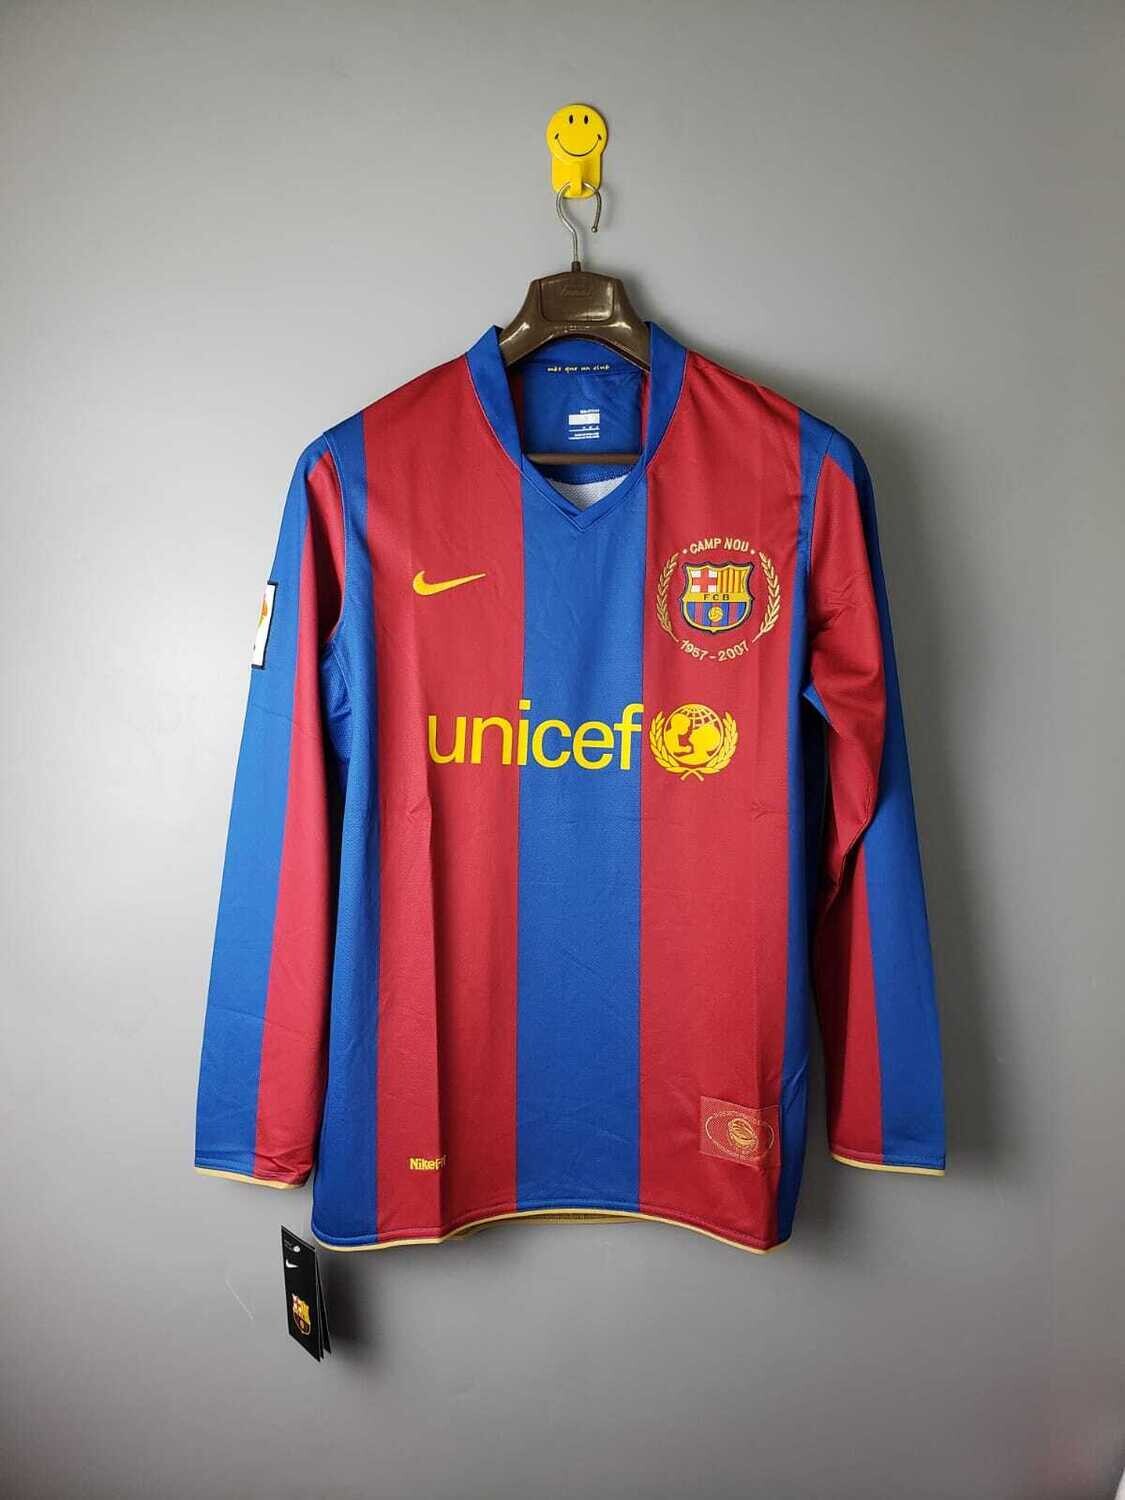 Barcelona 2007 Retro Home Camp Nou Edition Full Sleeves Jersey [Pre-paid Only]